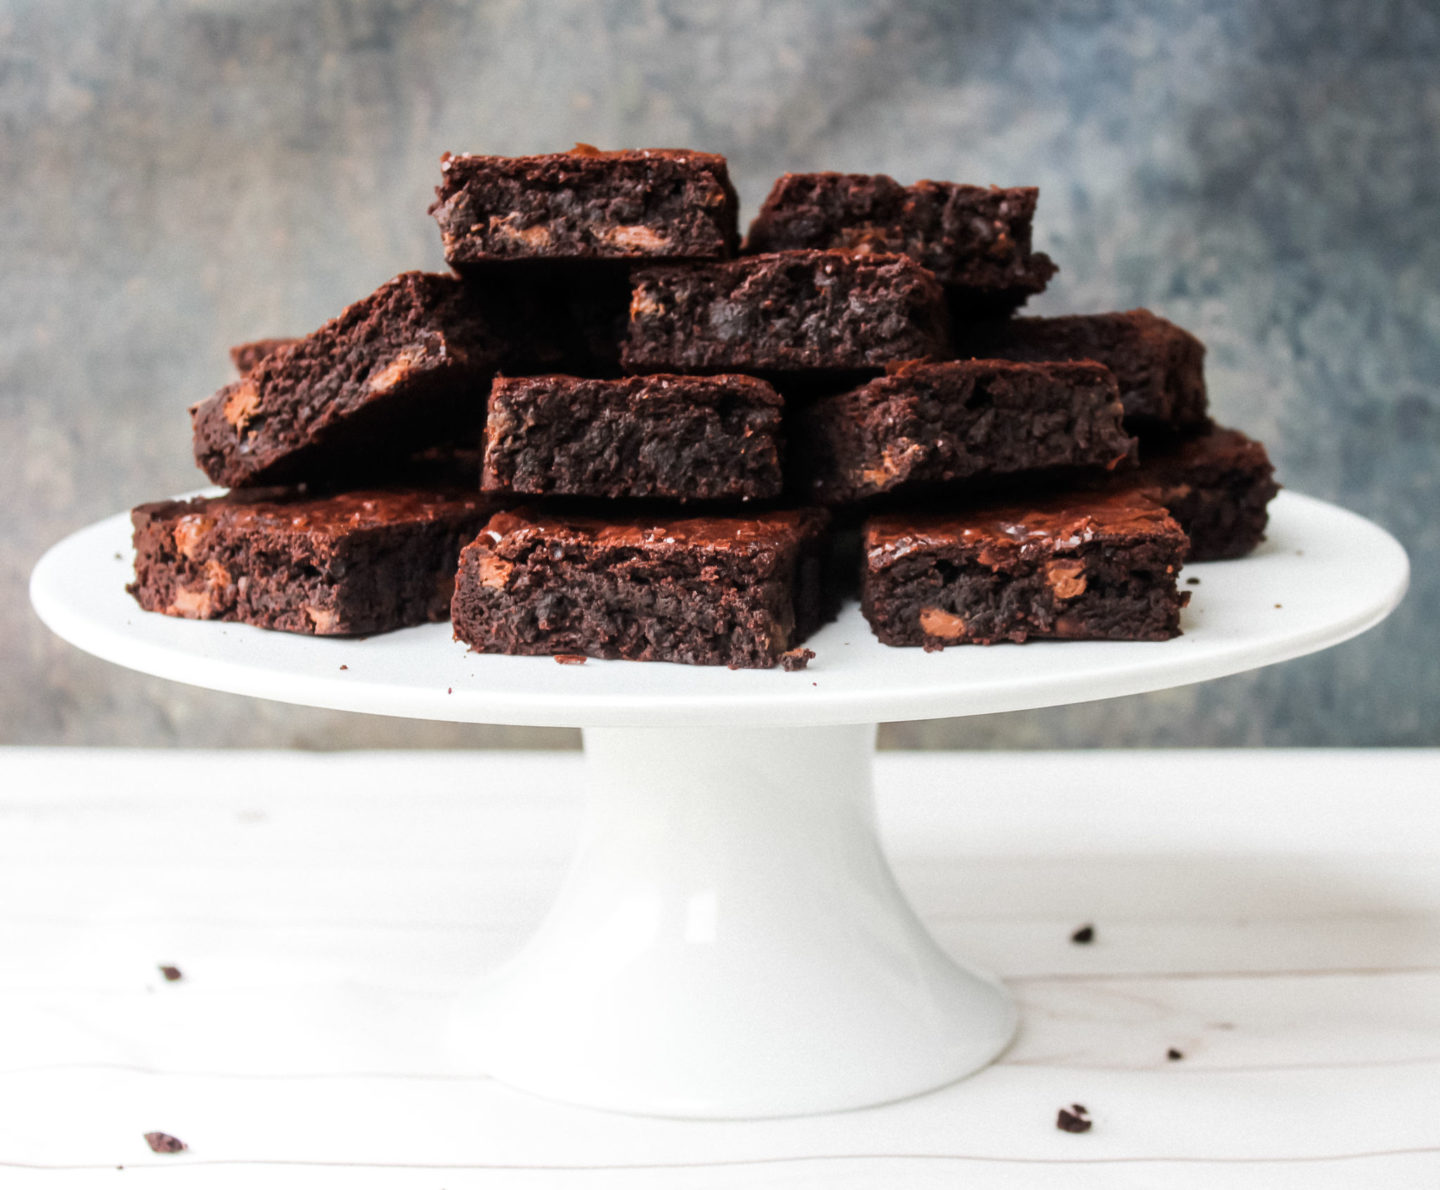 Chewy homemade brownies